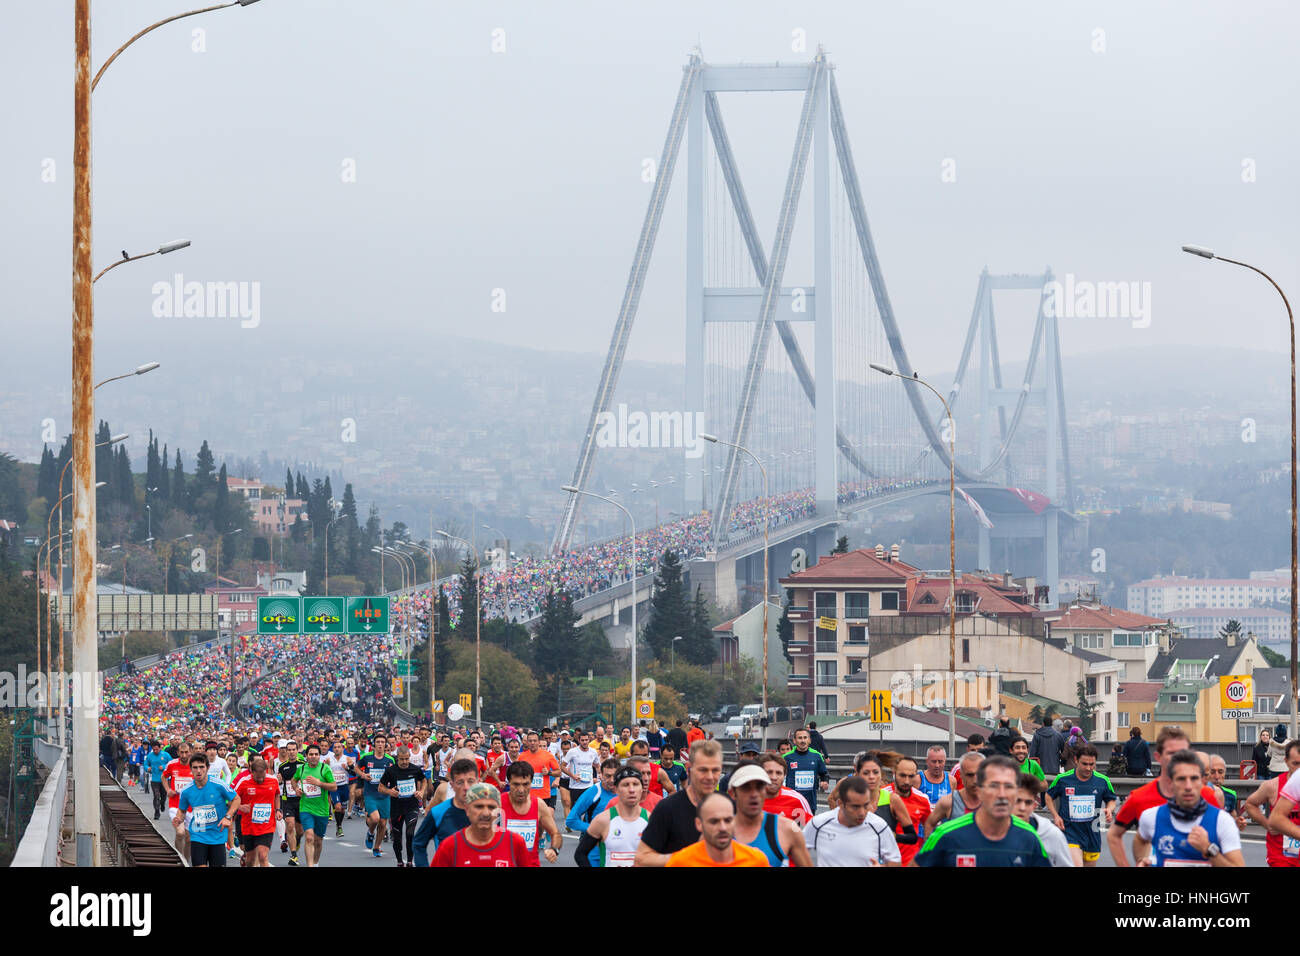 ISTANBUL, TURKEY - NOVEMBER 16: Competitors cross the Bosphorus Bridge that links Istanbul's European and Asian side during the 34th annual Euroasia Marathon on November 16, 2014 in Istanbul, Turkey. Stock Photo